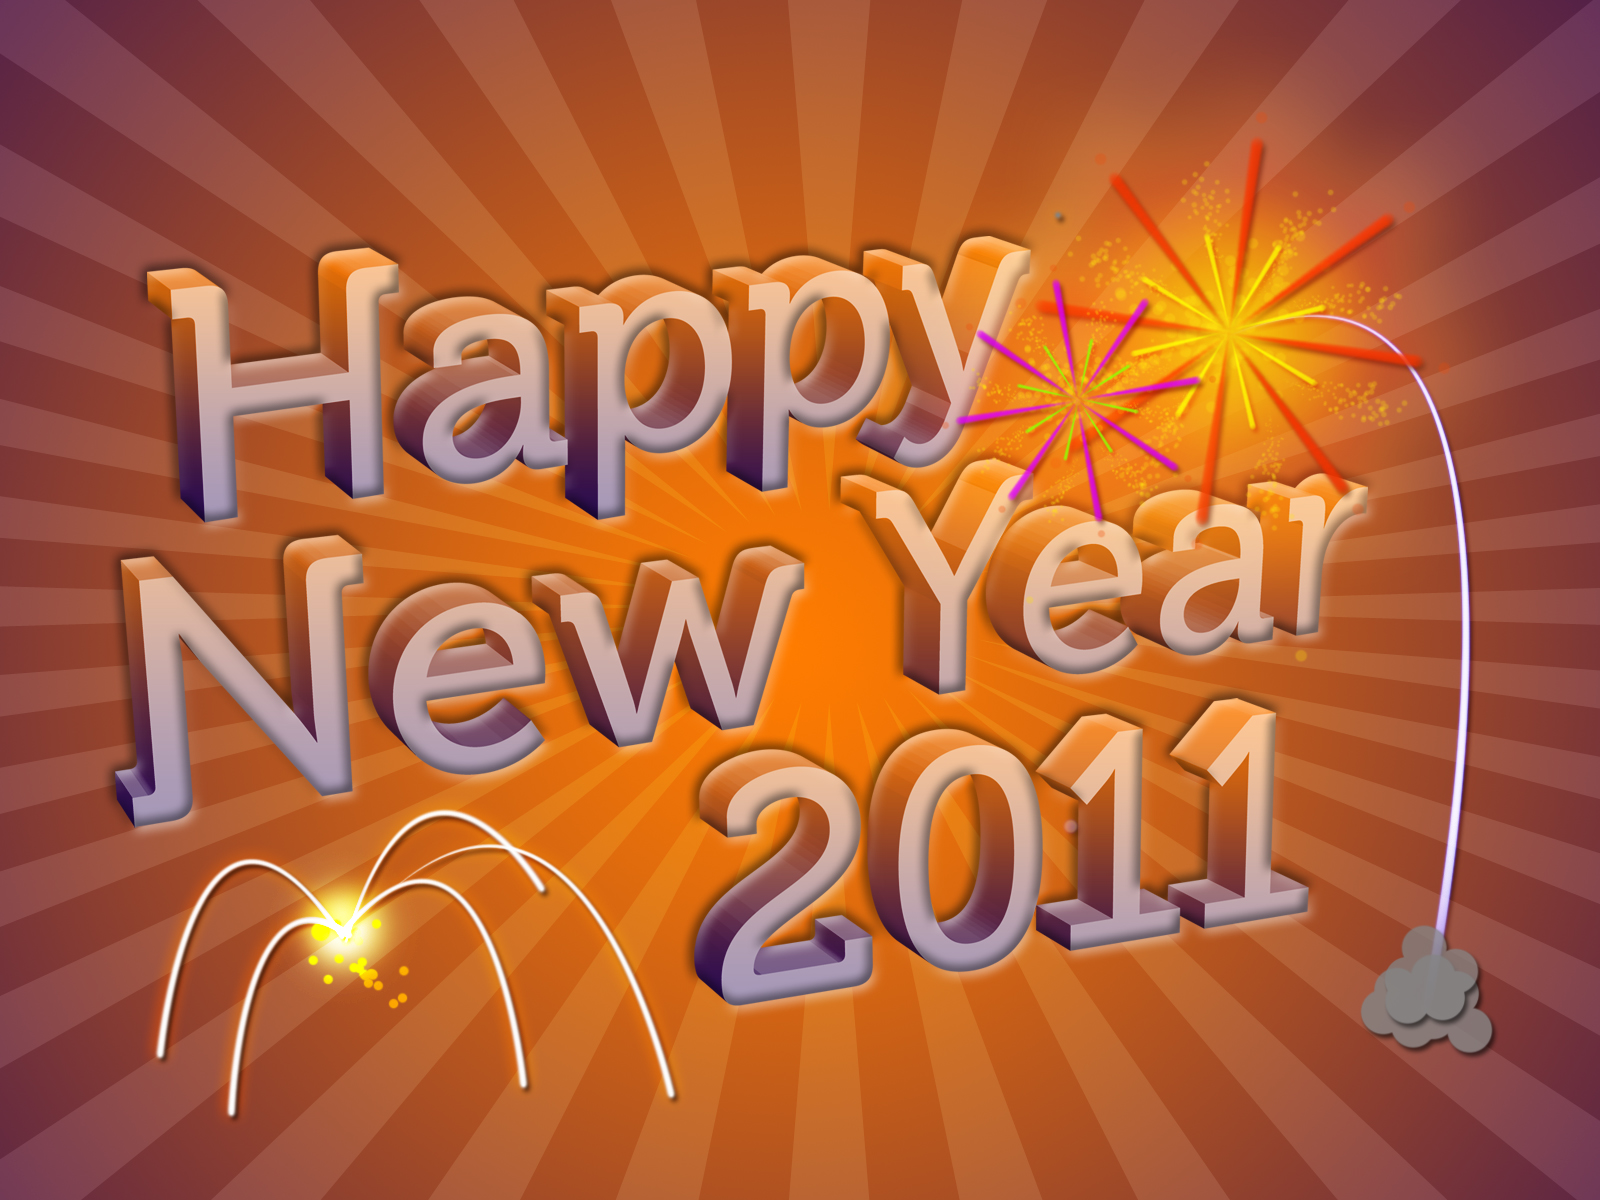 Wallpaper new year download